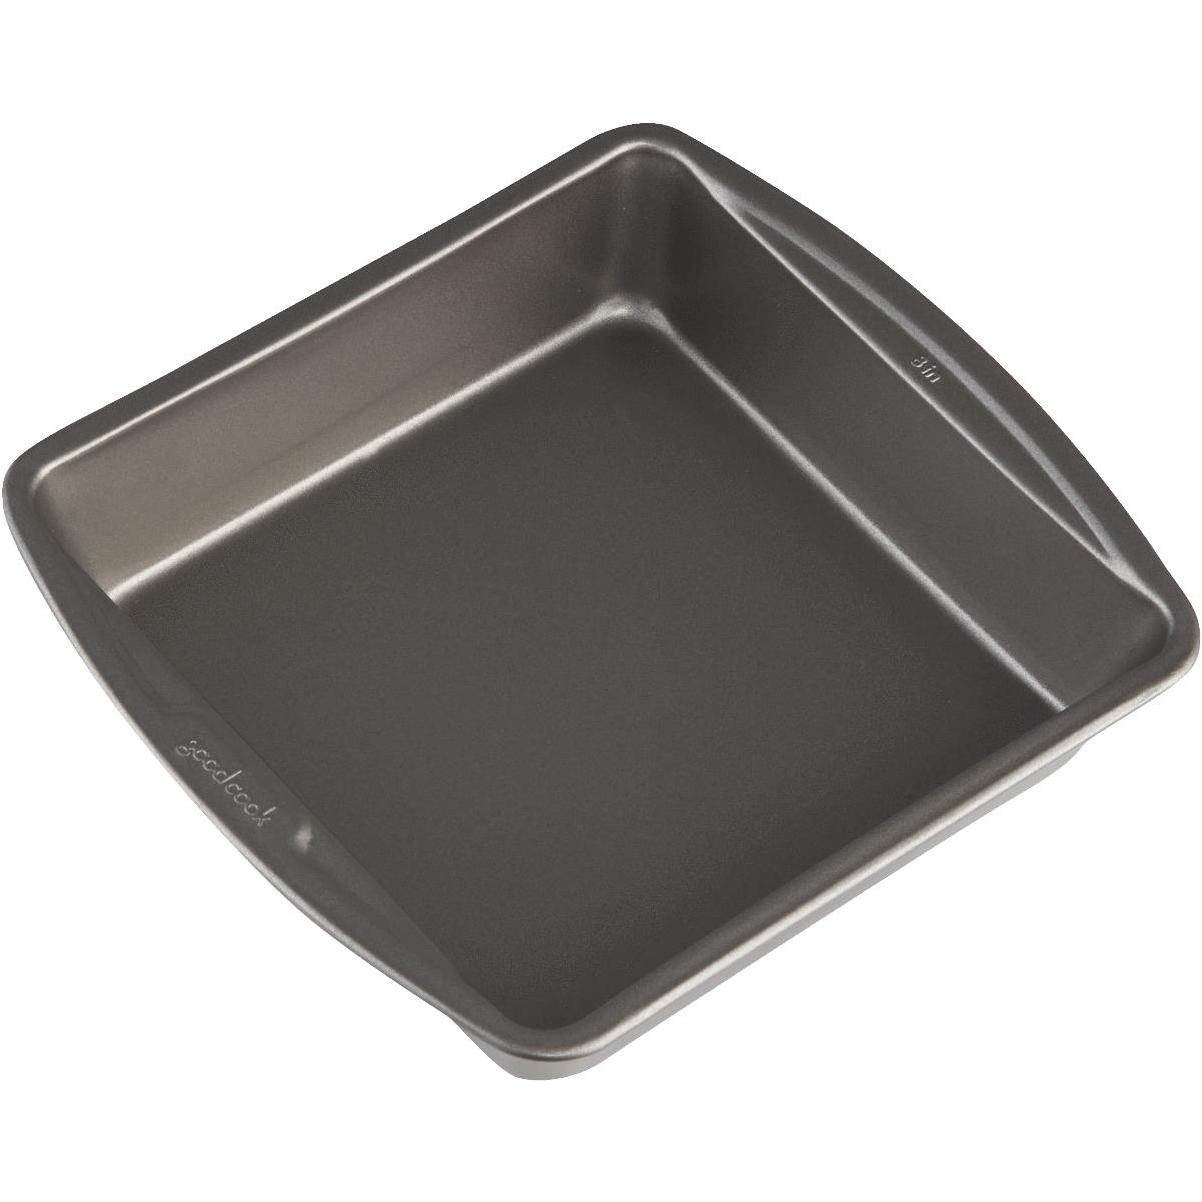 Goodcook 11 In. x 7 In. Non-Stick Biscuit & Brownie Baking Pan